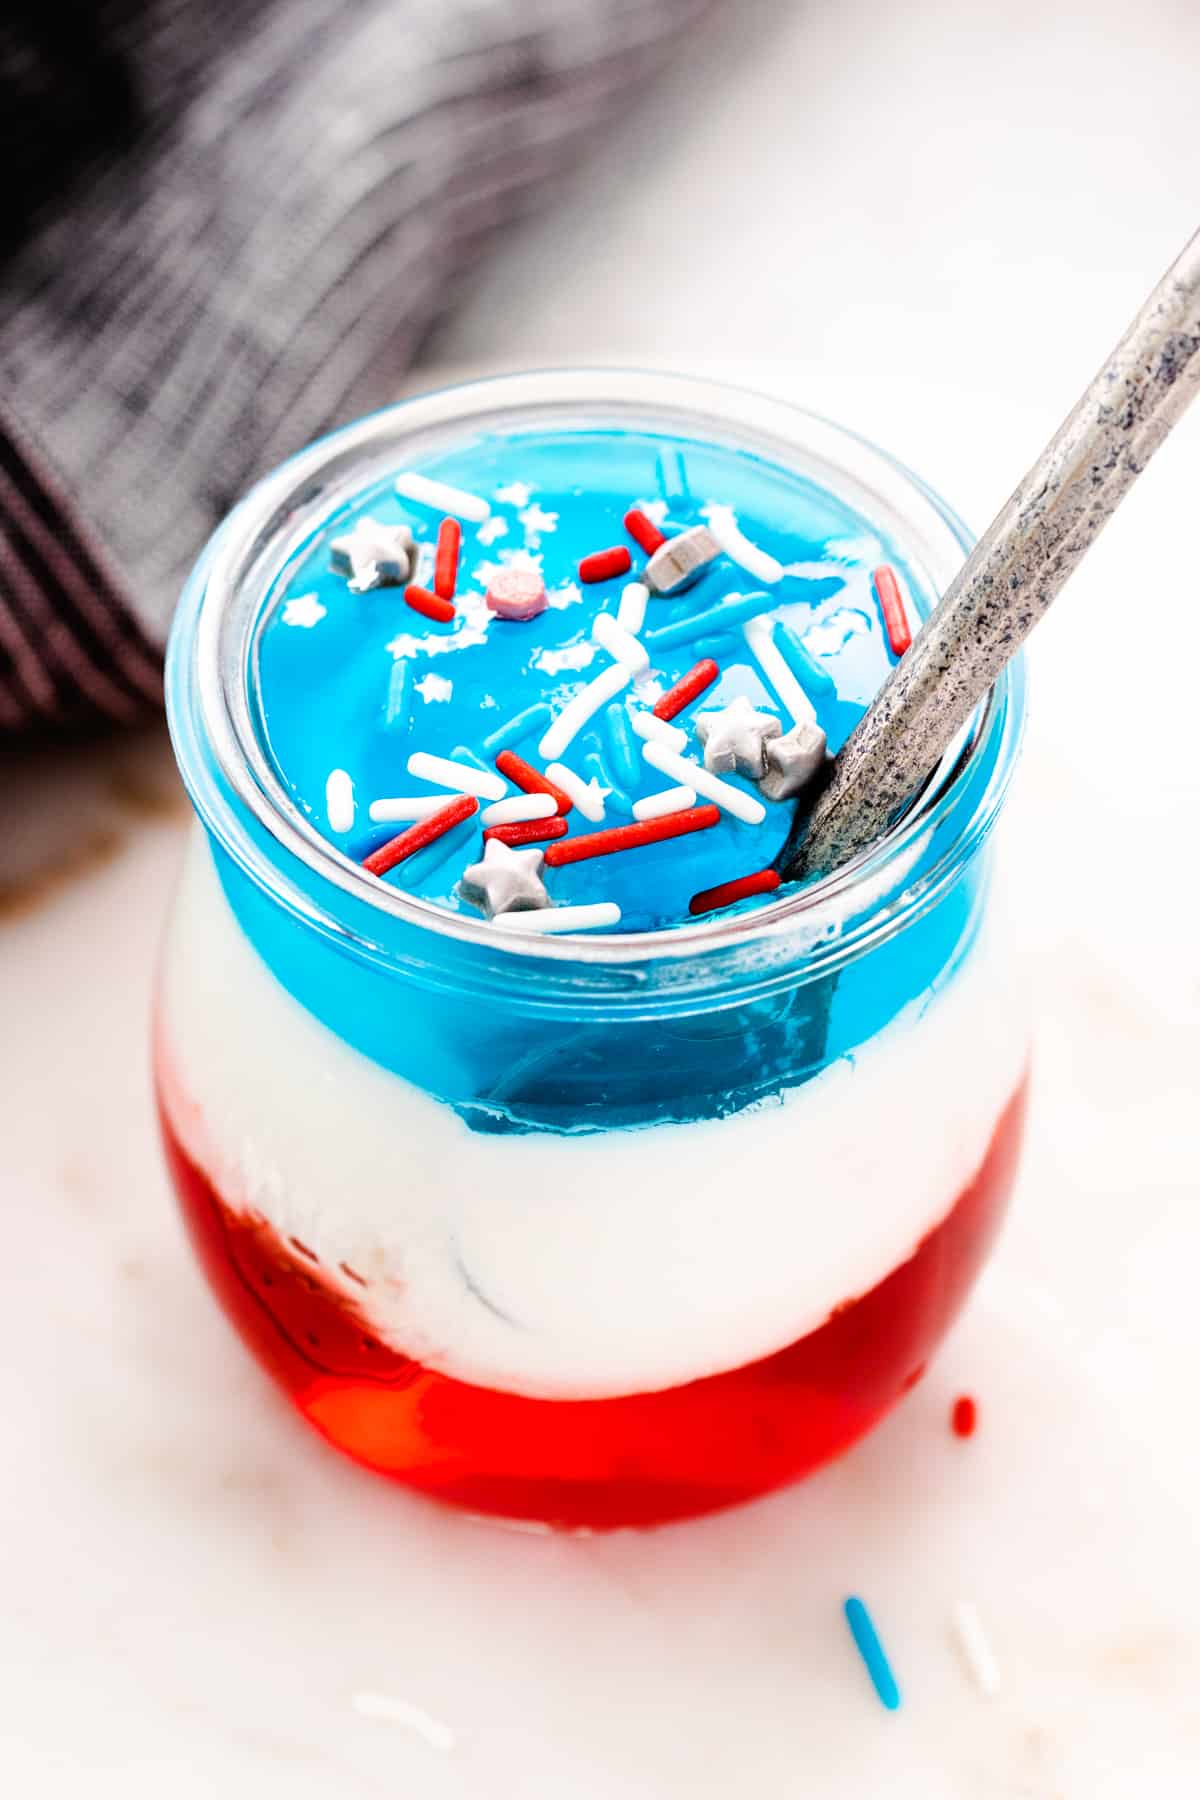 Individual size red, white, and blue layered jello cup with sprinkles and a silver spoon sticking out of the cup.